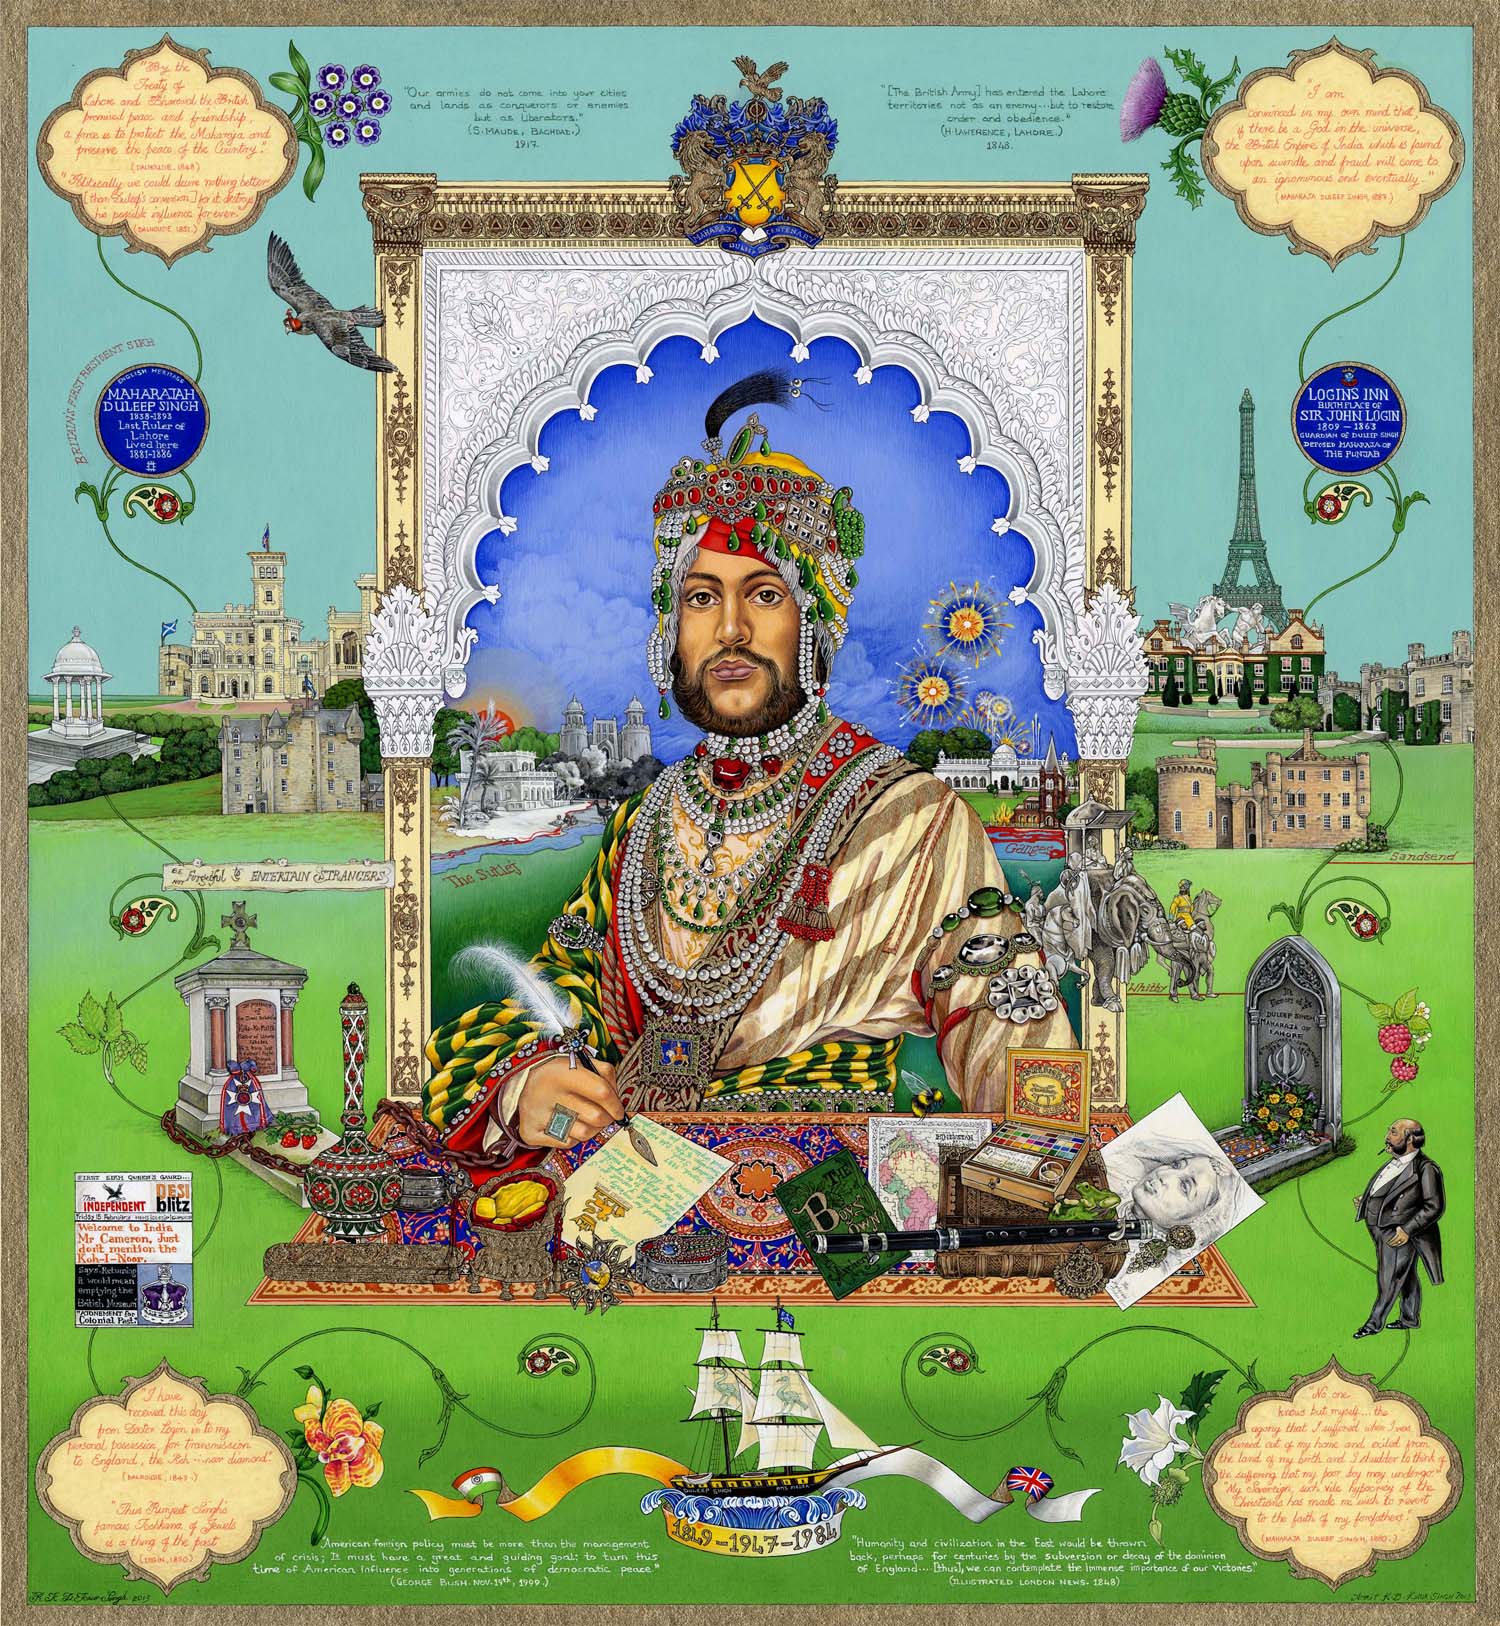 Casualty of War: A Portrait of Maharaja Duleep Singh © The Singh Twins.